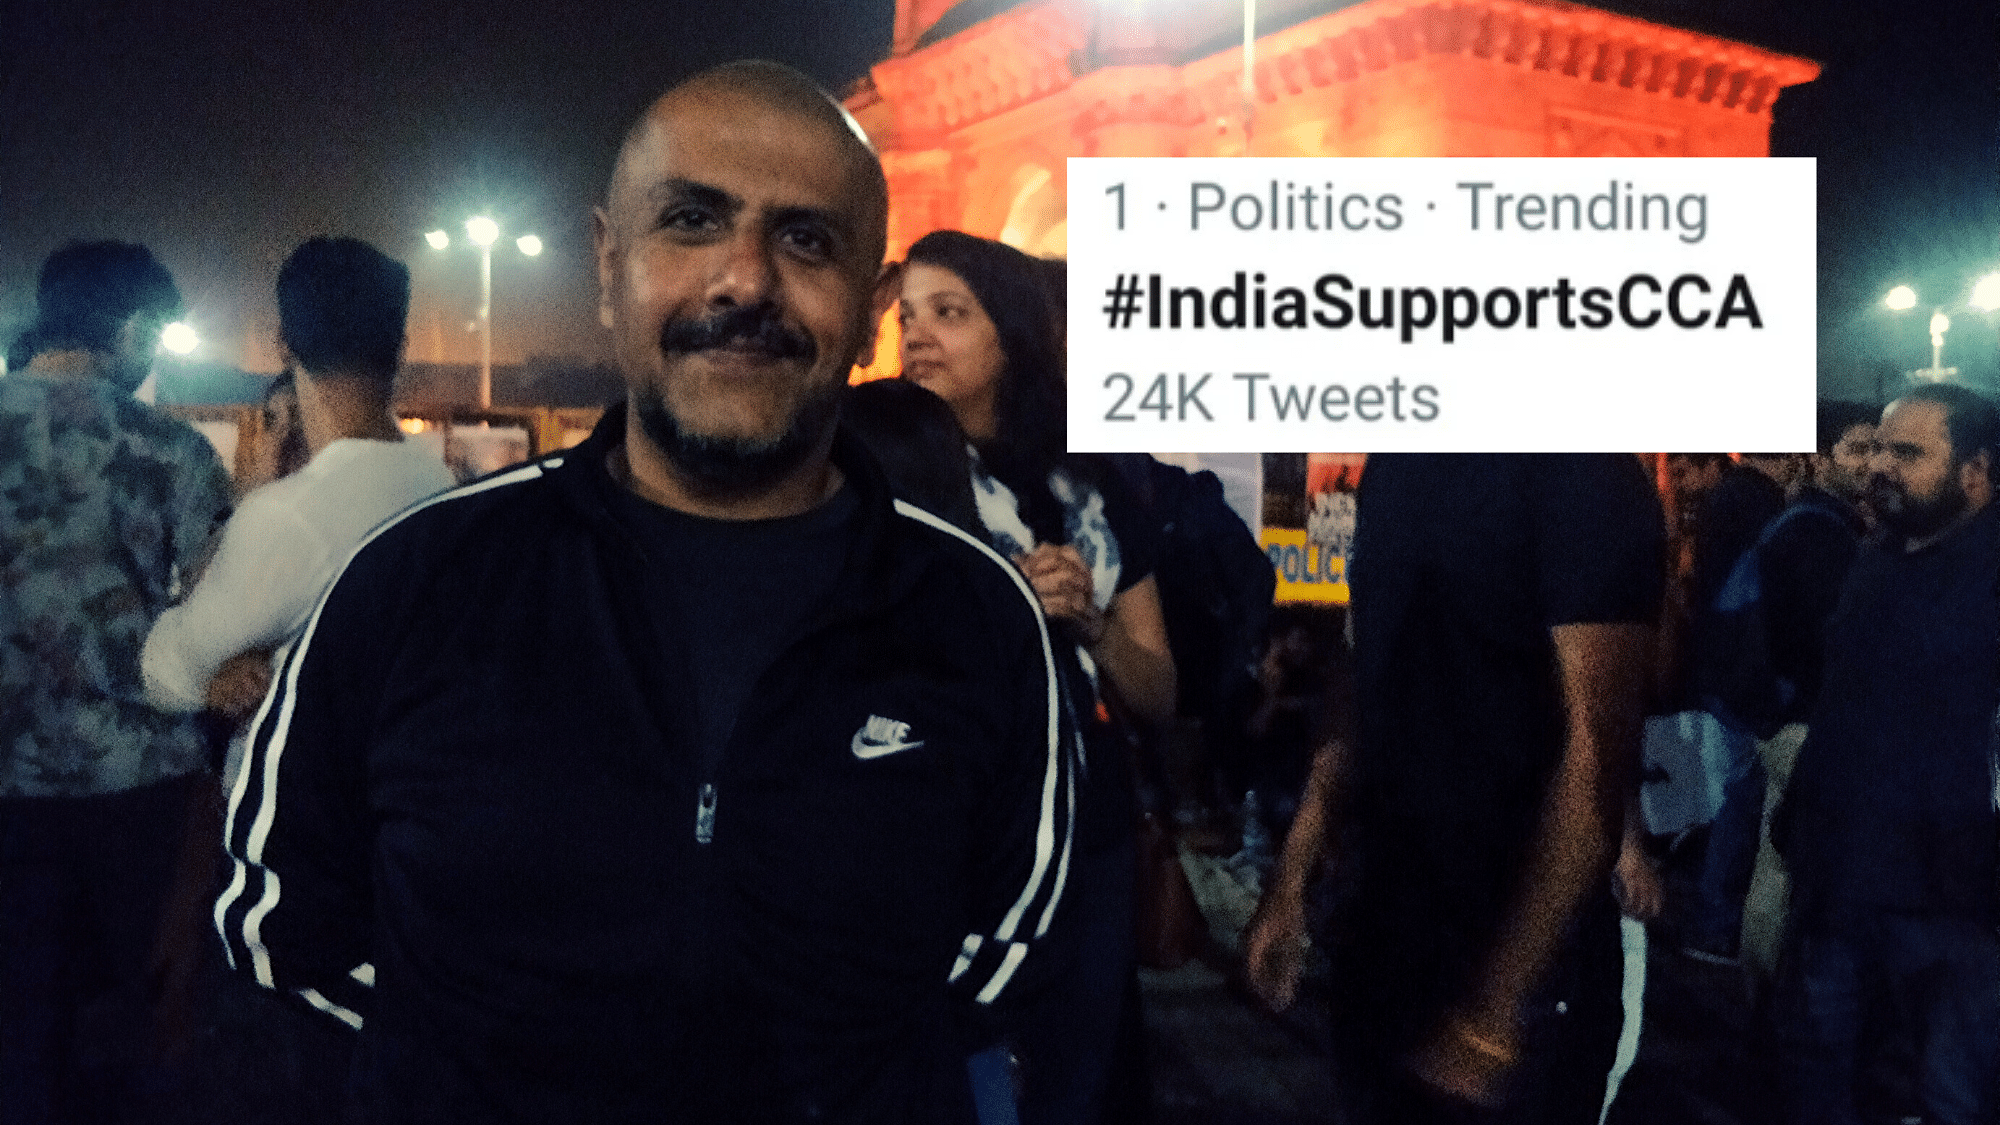 Singer and composer Vishal Dadlani asks, “If you can’t create a Twitter trend properly, how will you run the nation properly?”